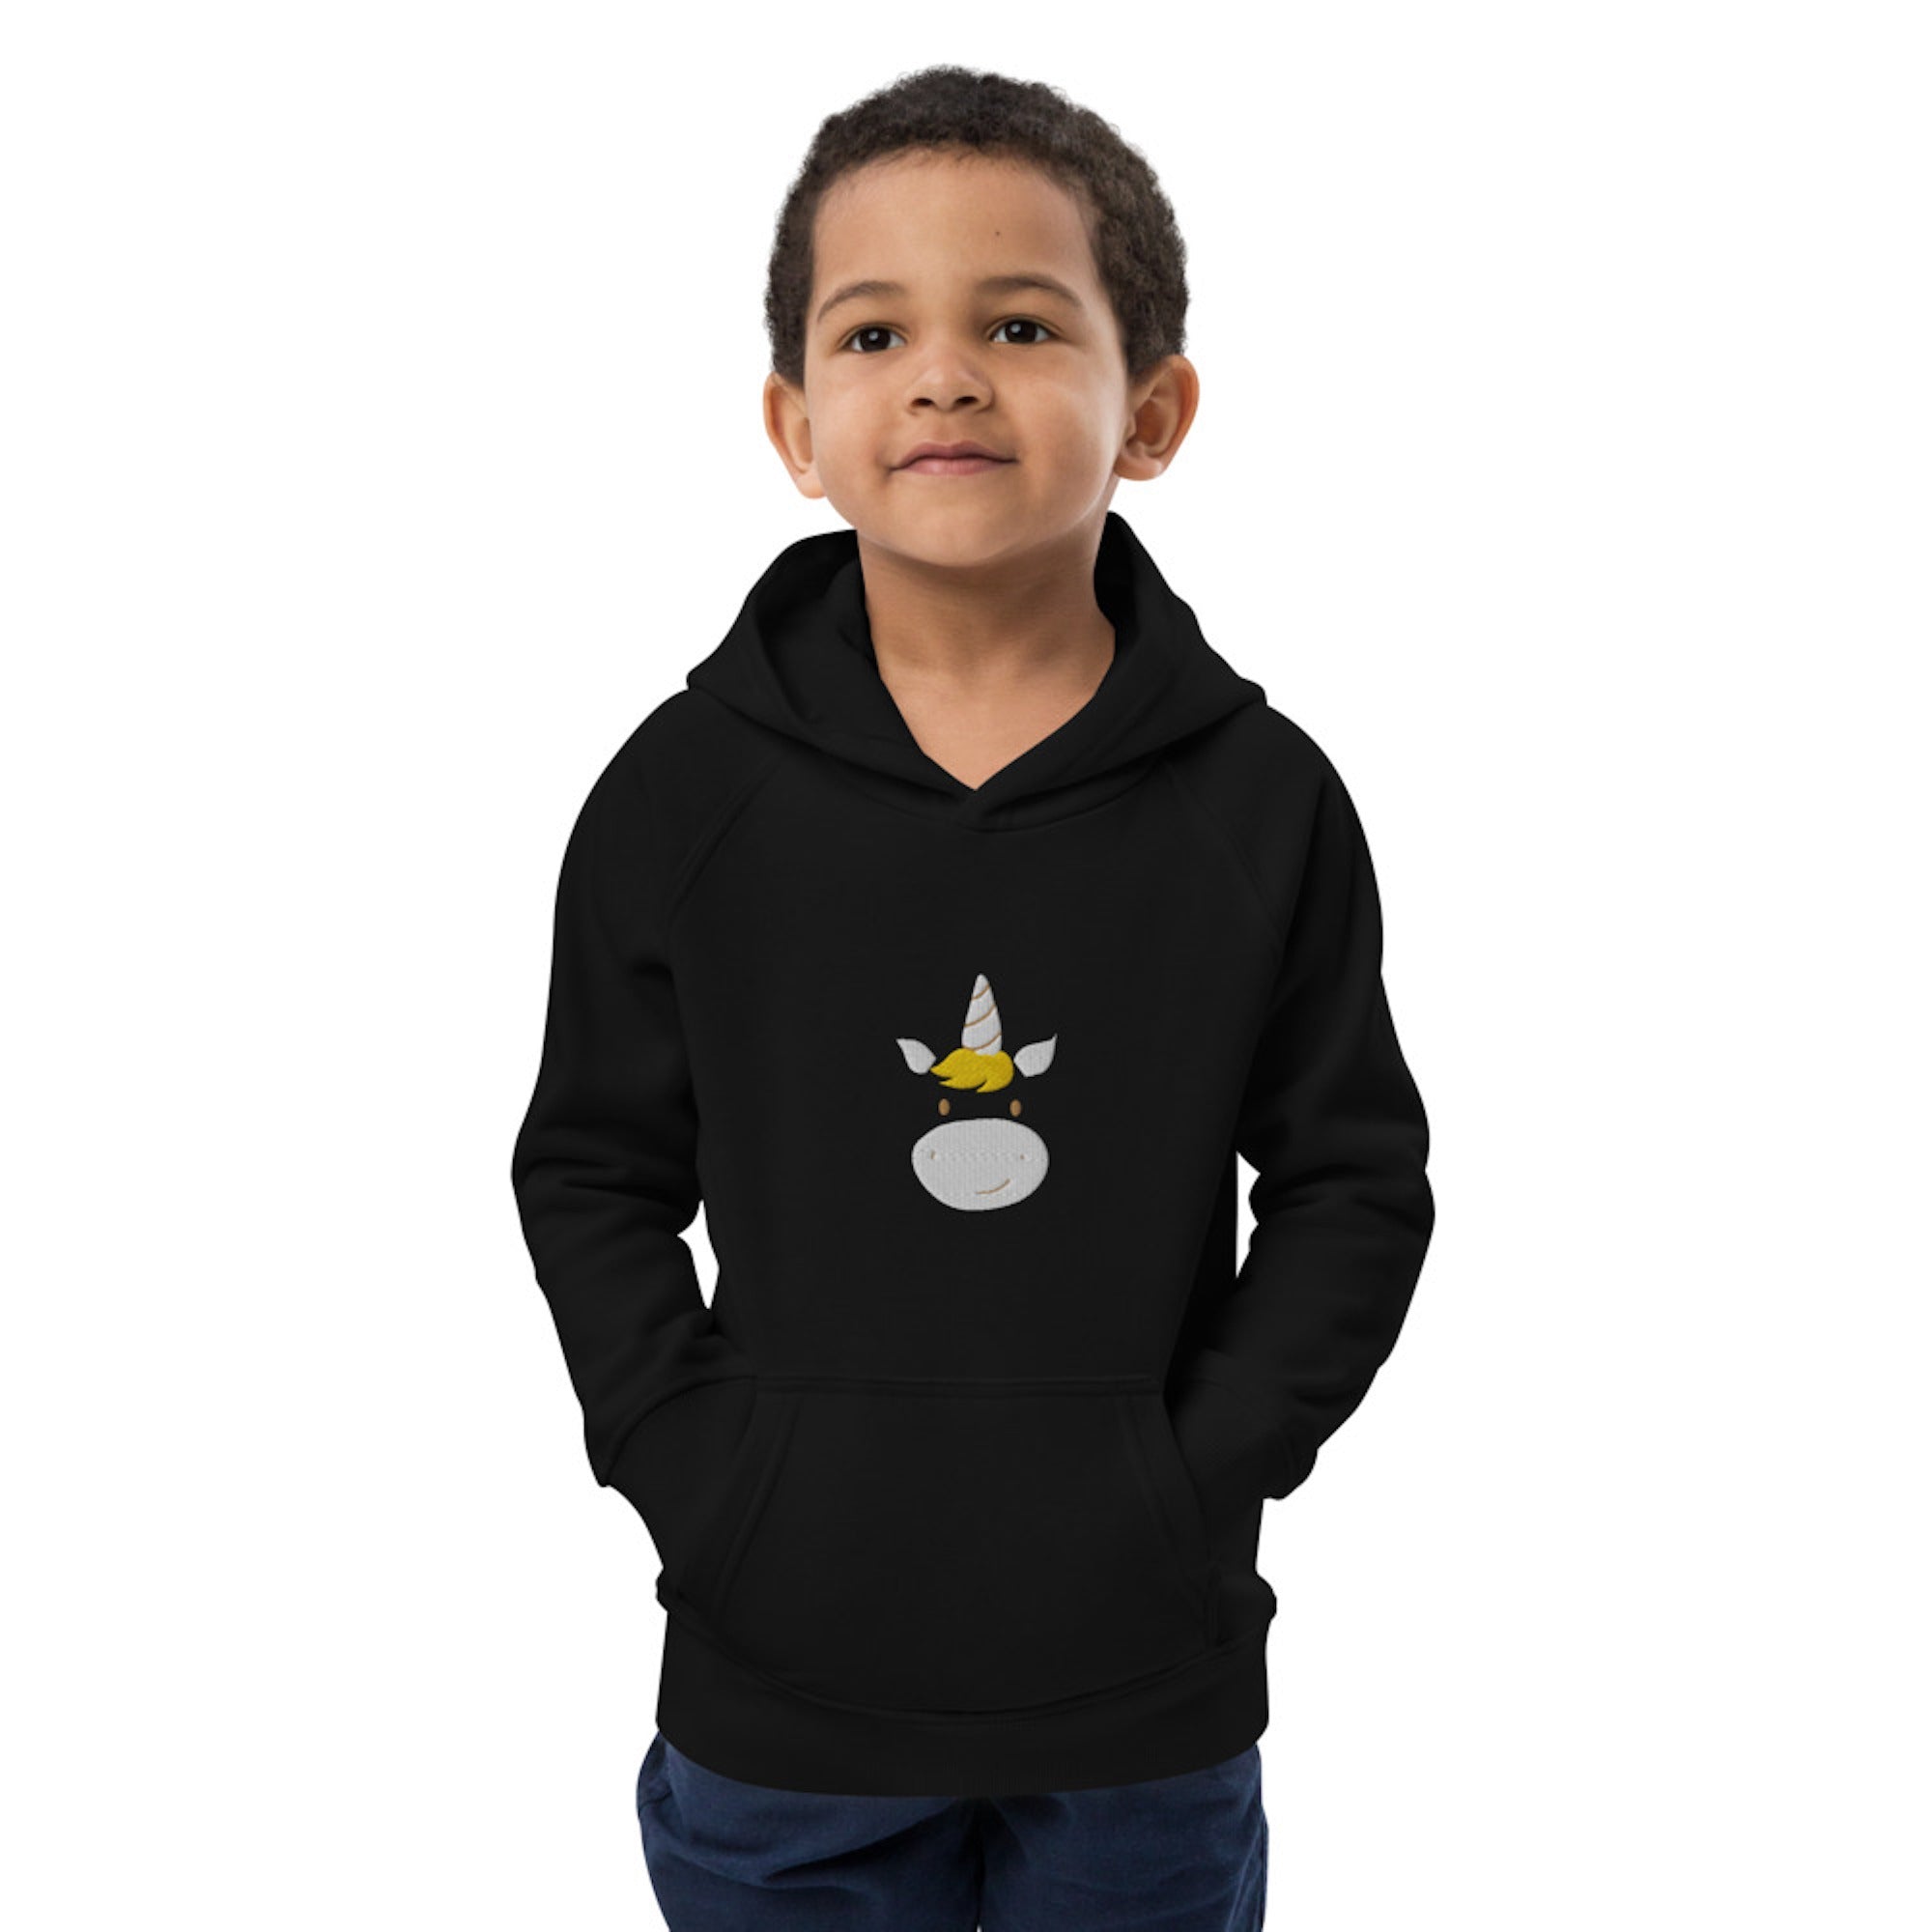 Unicorn Kids Eco Hoodie with cute animals, Organic Cotton pullover for children in black, gift idea for kids, soft hoodie for kids-3